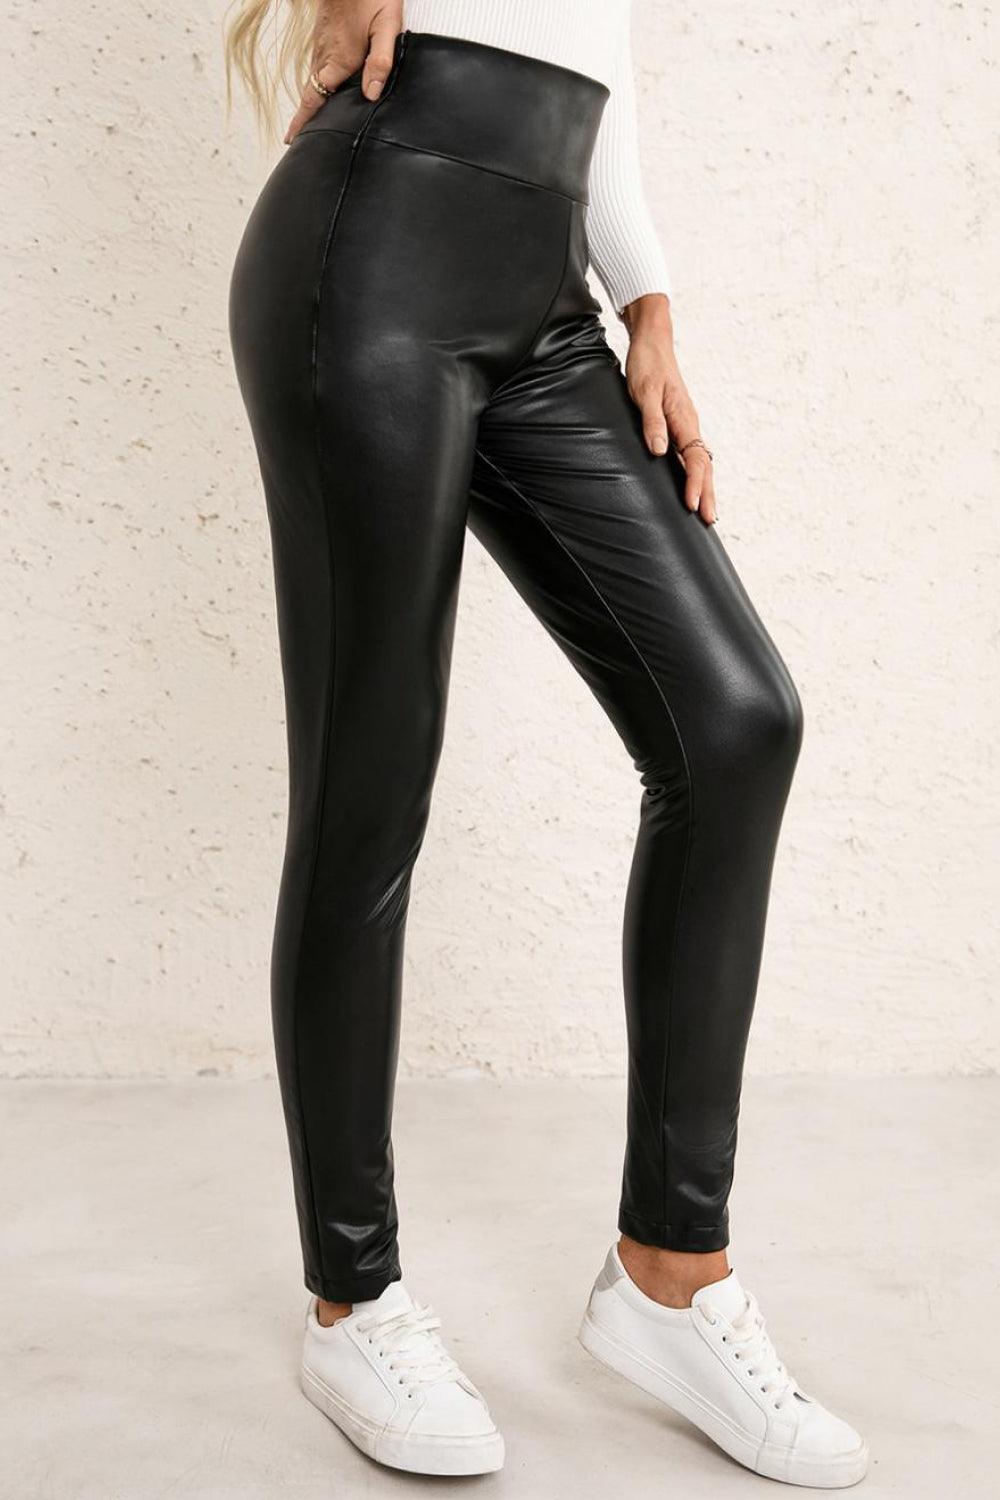 Skinny Leggings Pu Leather Edgy Style -Women’s pu leather tight leggings#Firefly Lane Boutique1